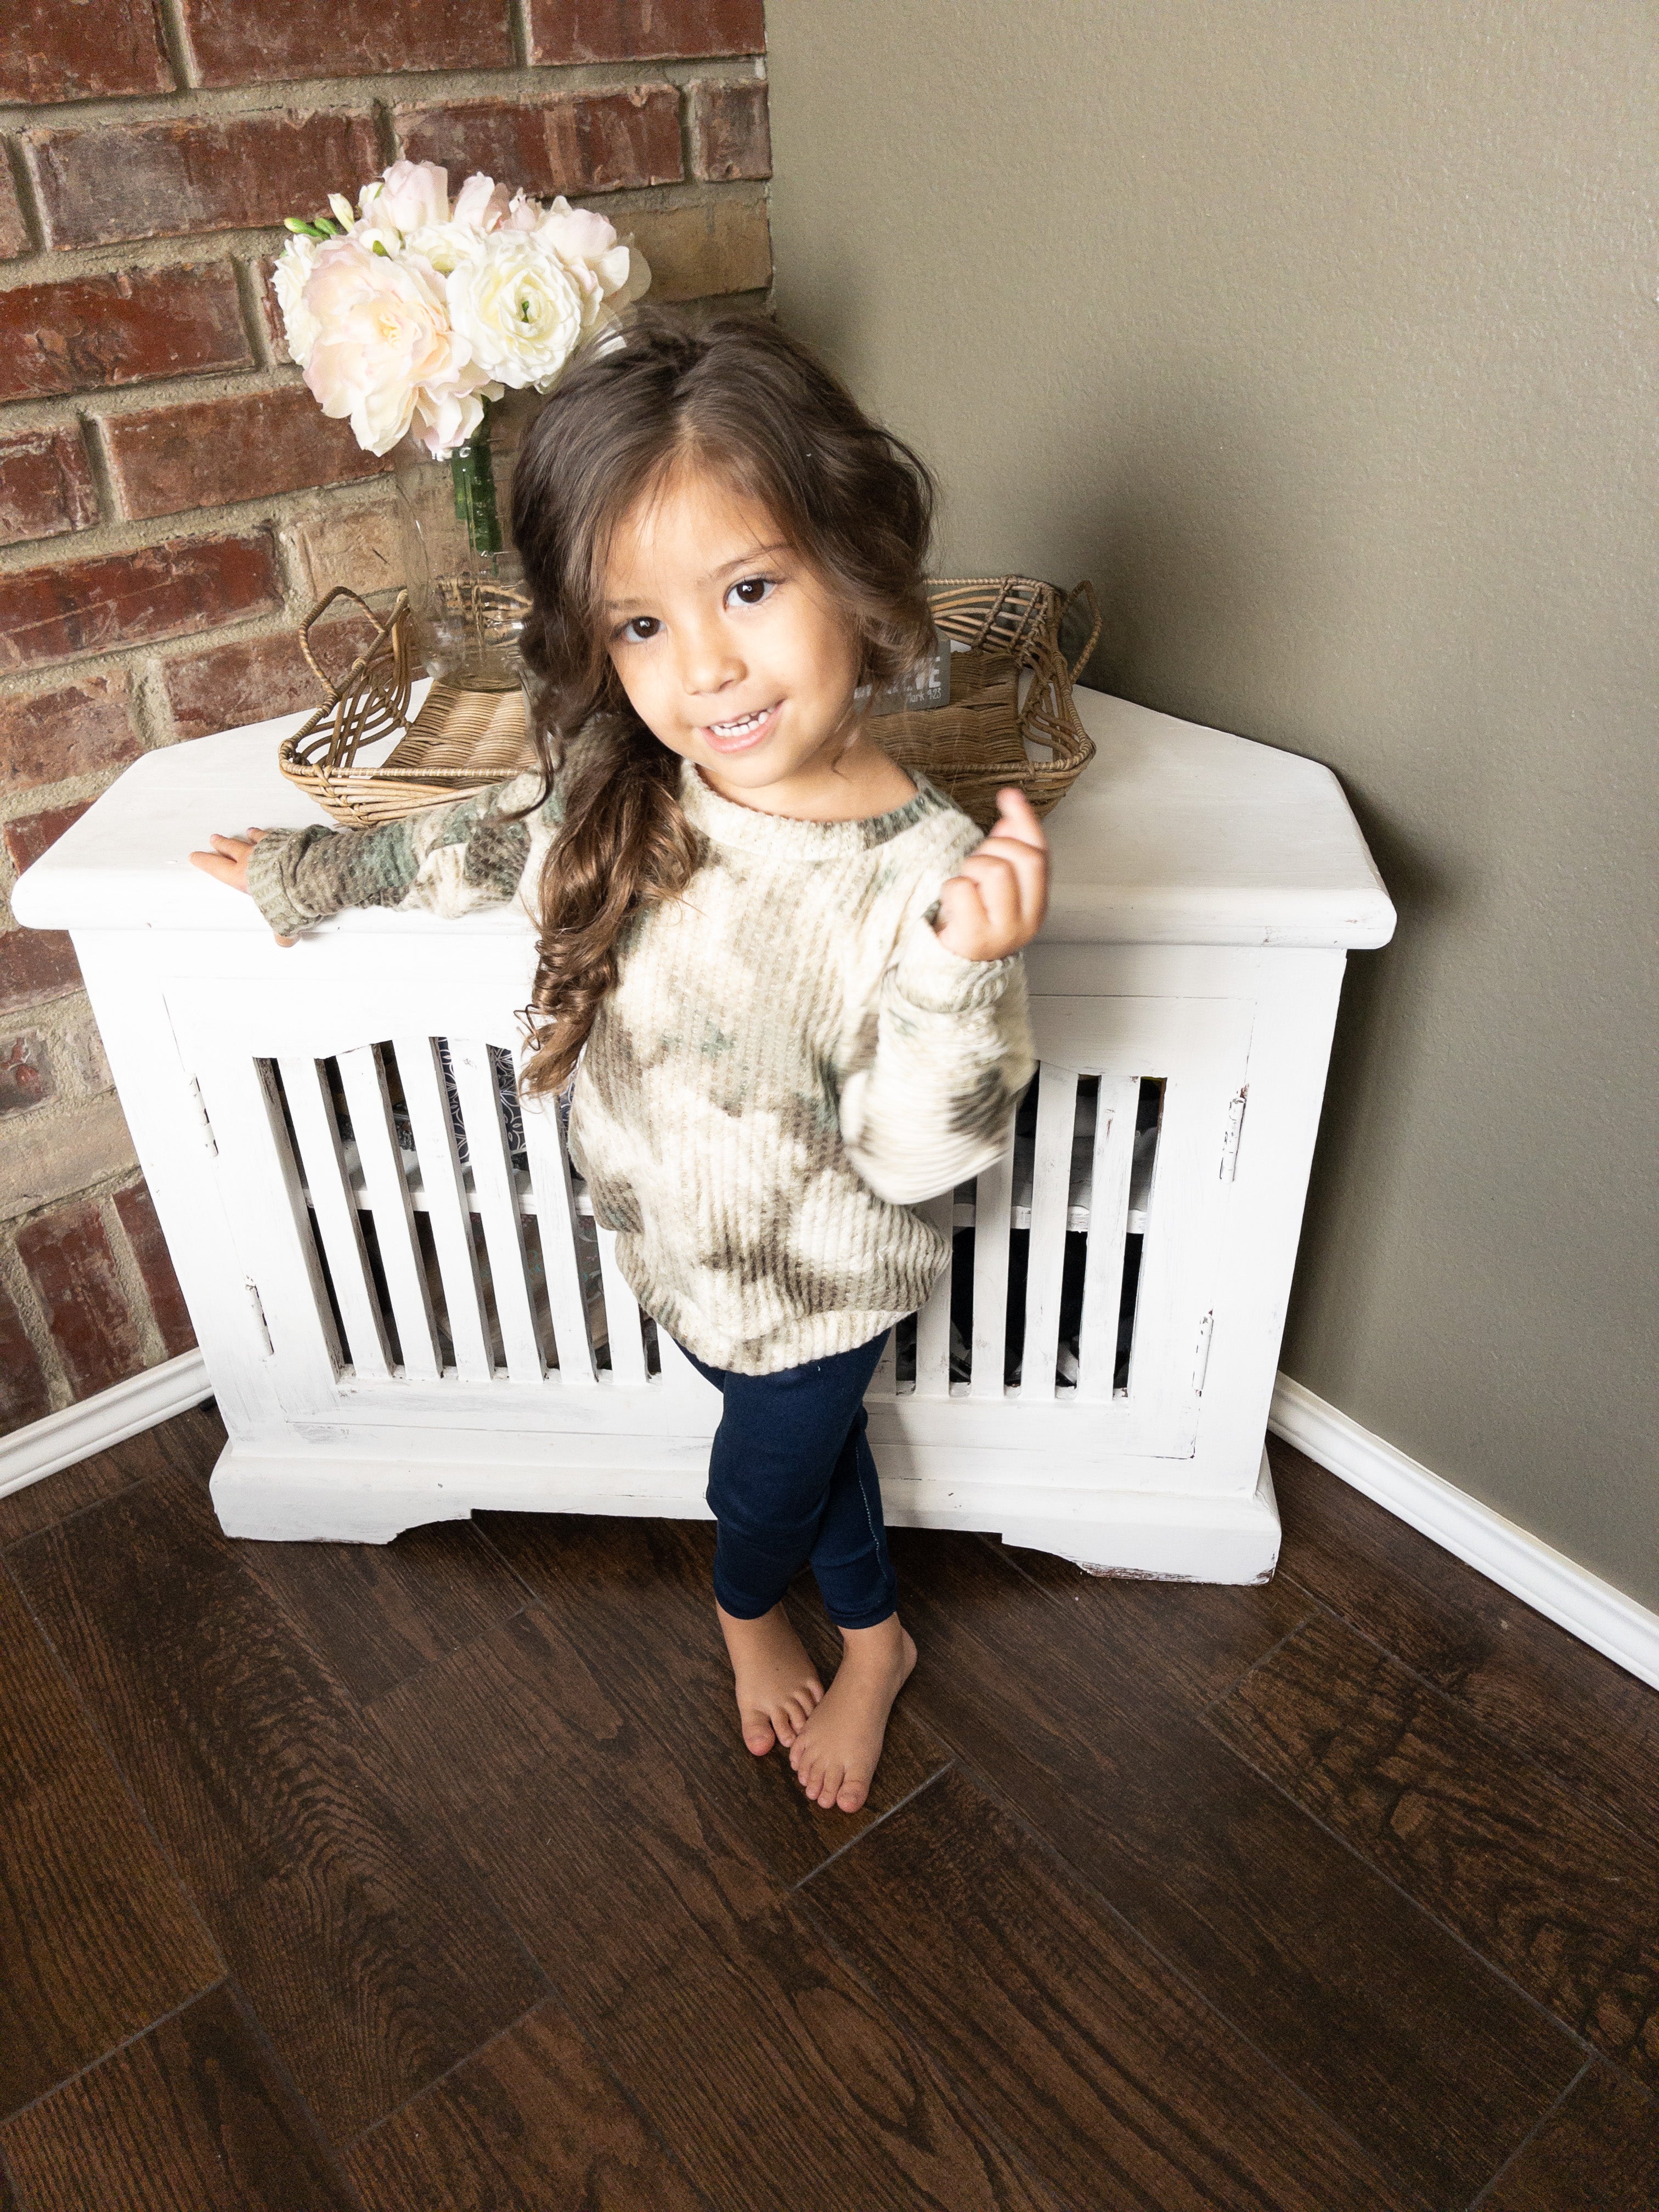 Tie Dye Baby Slouchy Sweater Options